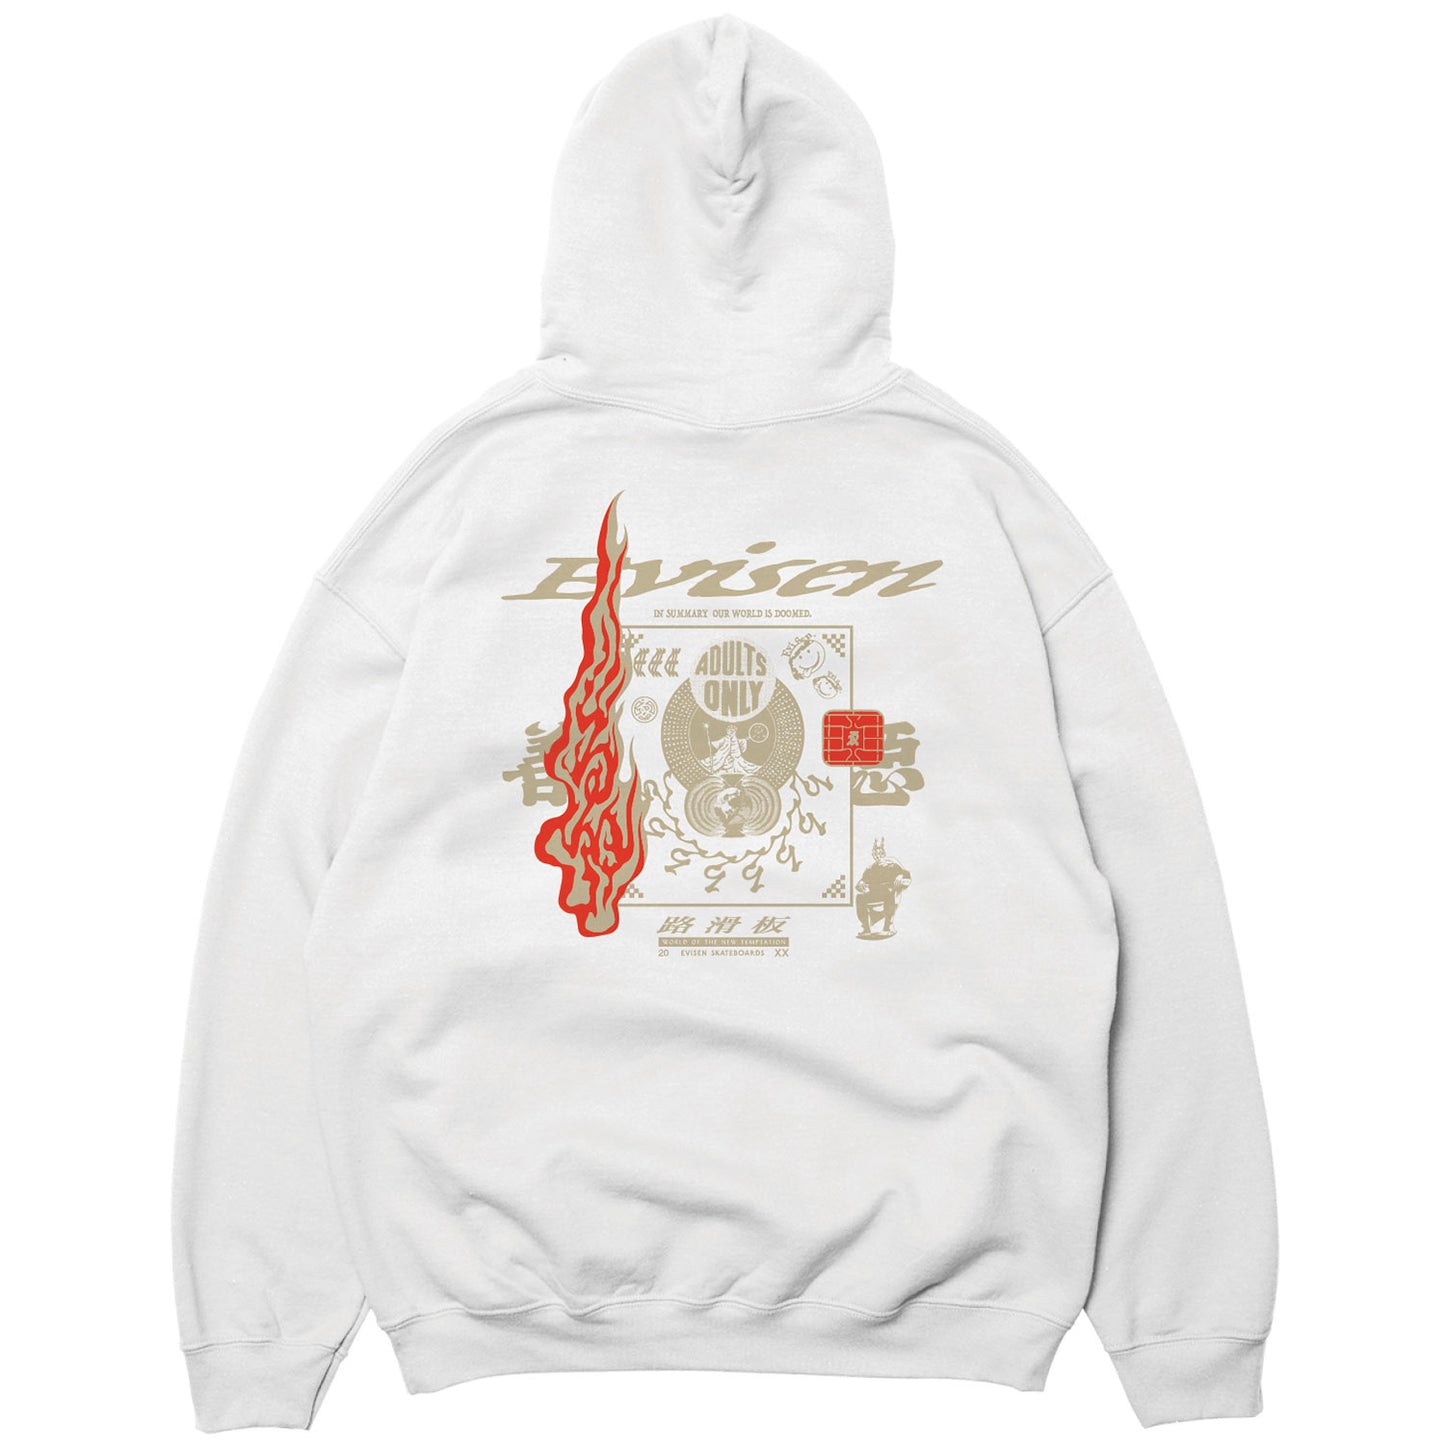 NEO ADULTS ONLY HOODIE - WHITE